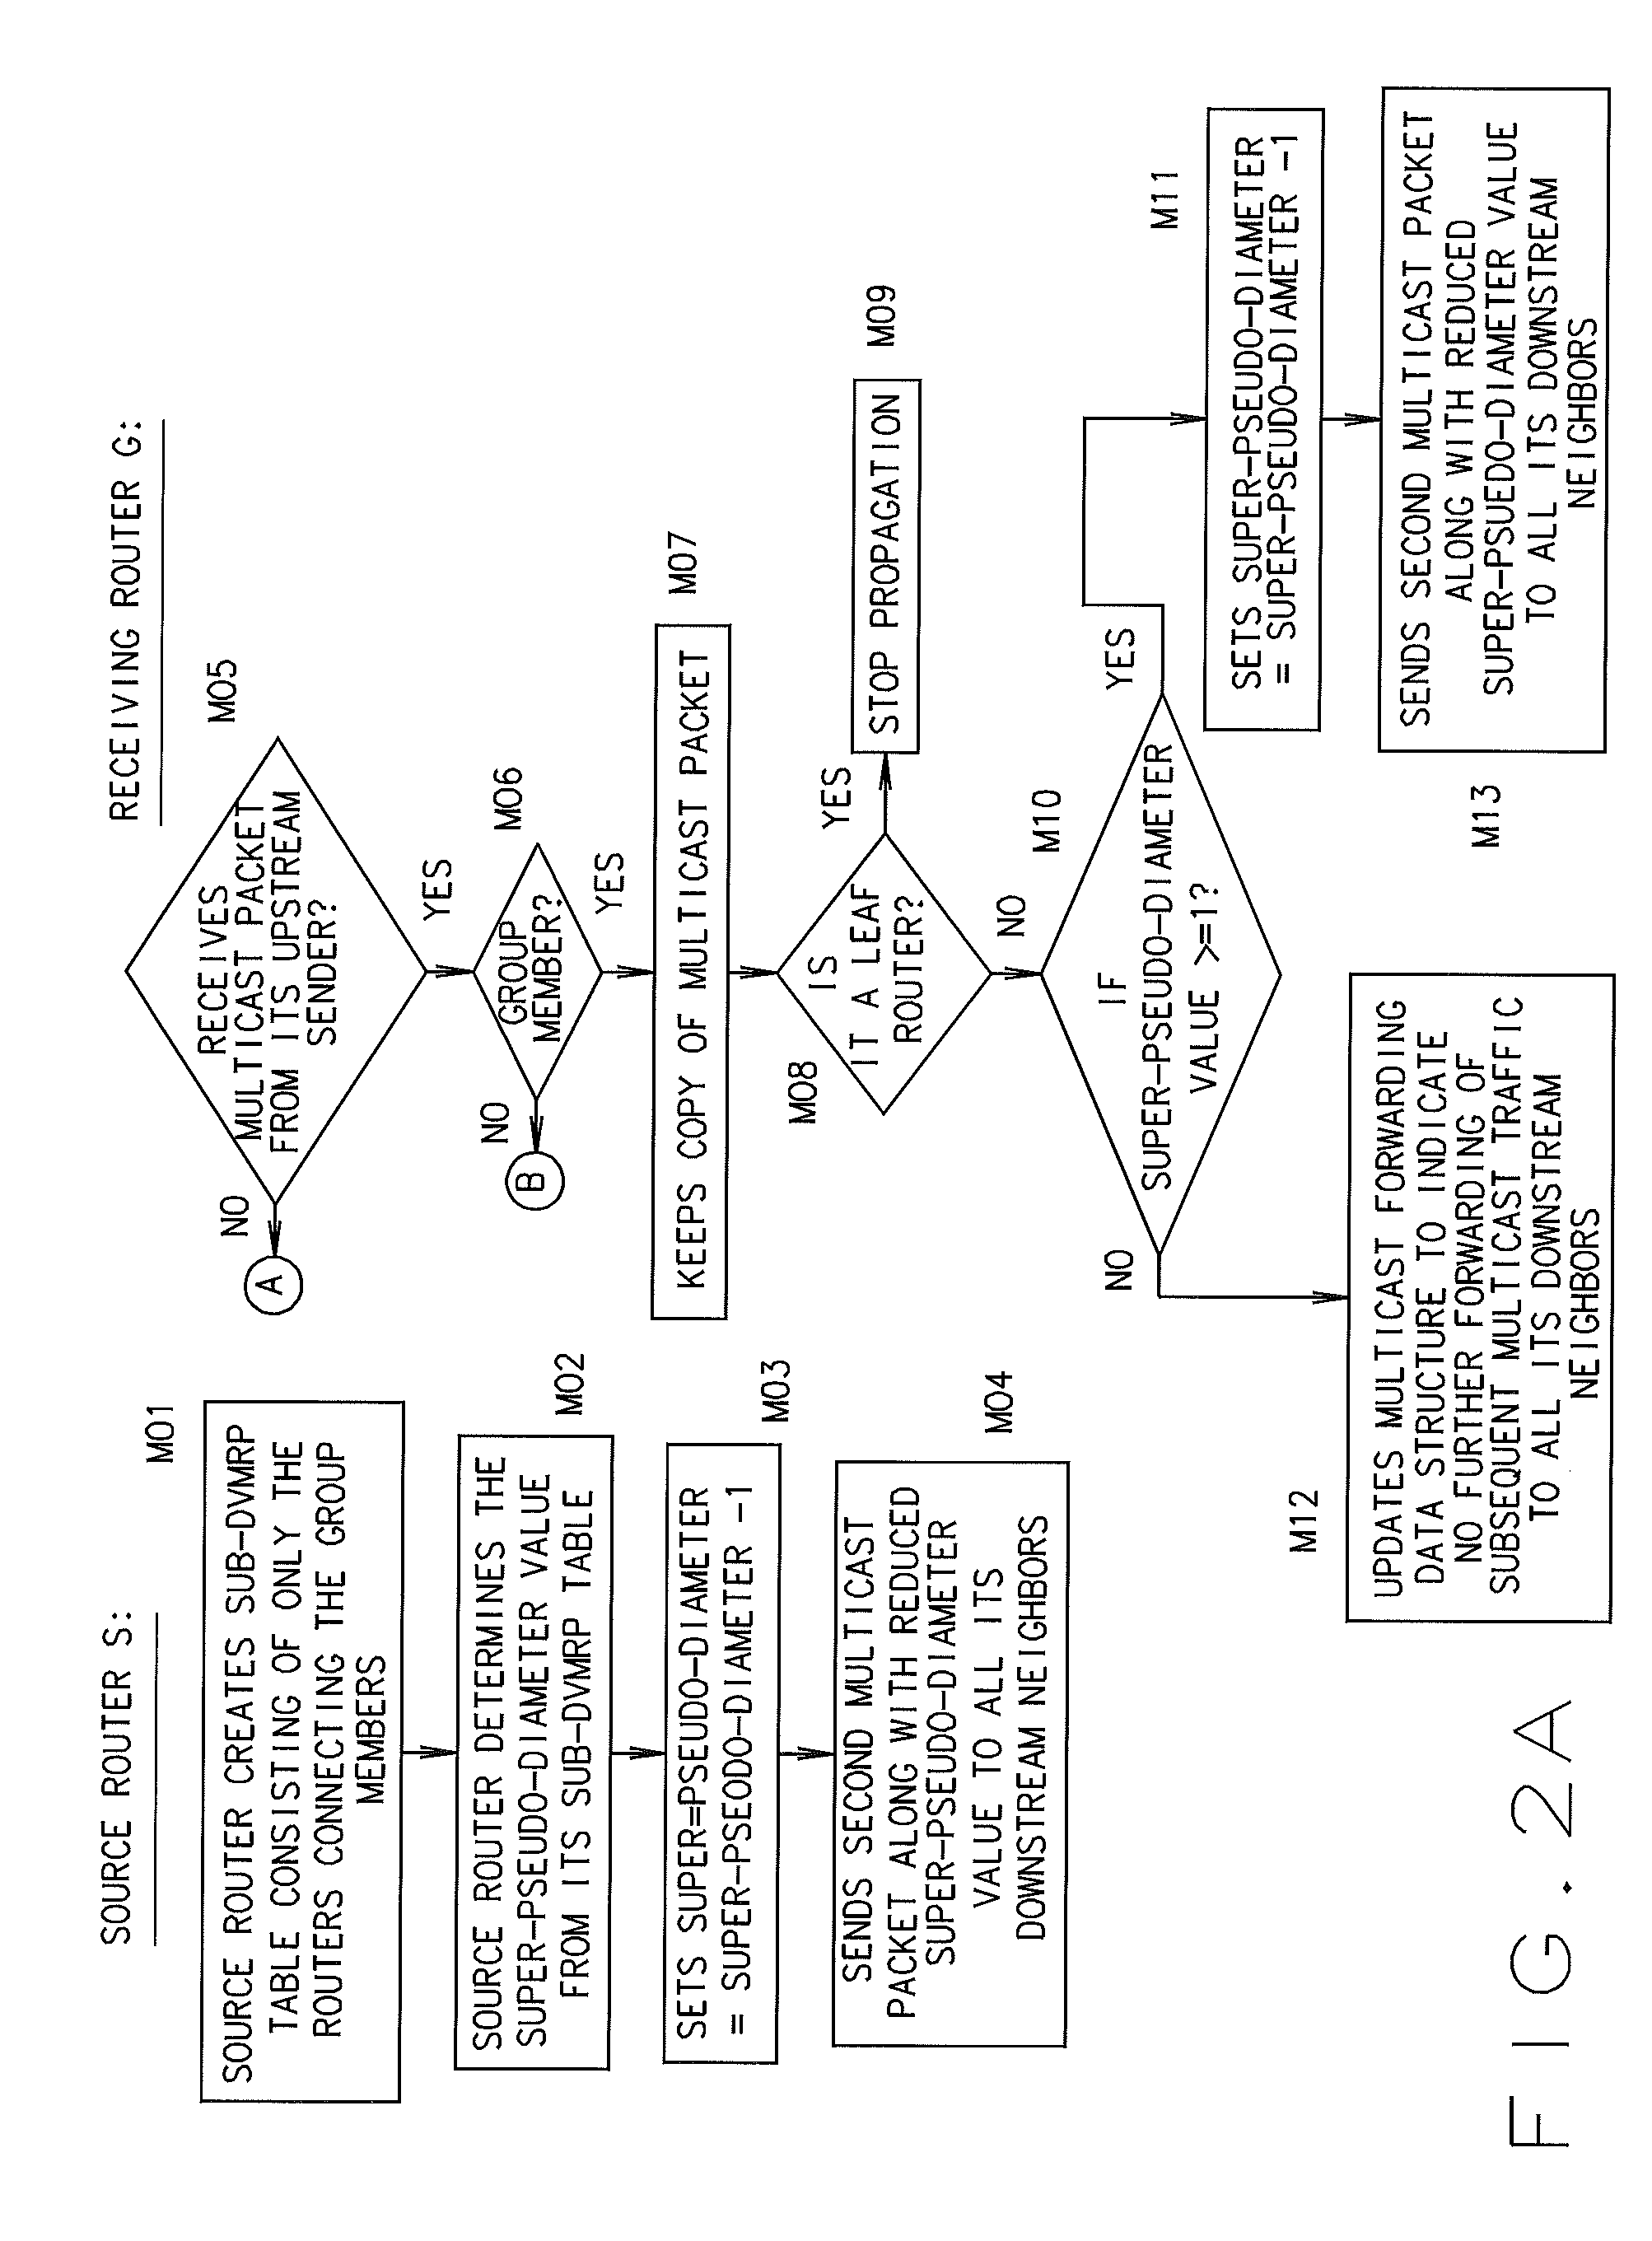 Multicast routing protocol for computer networks